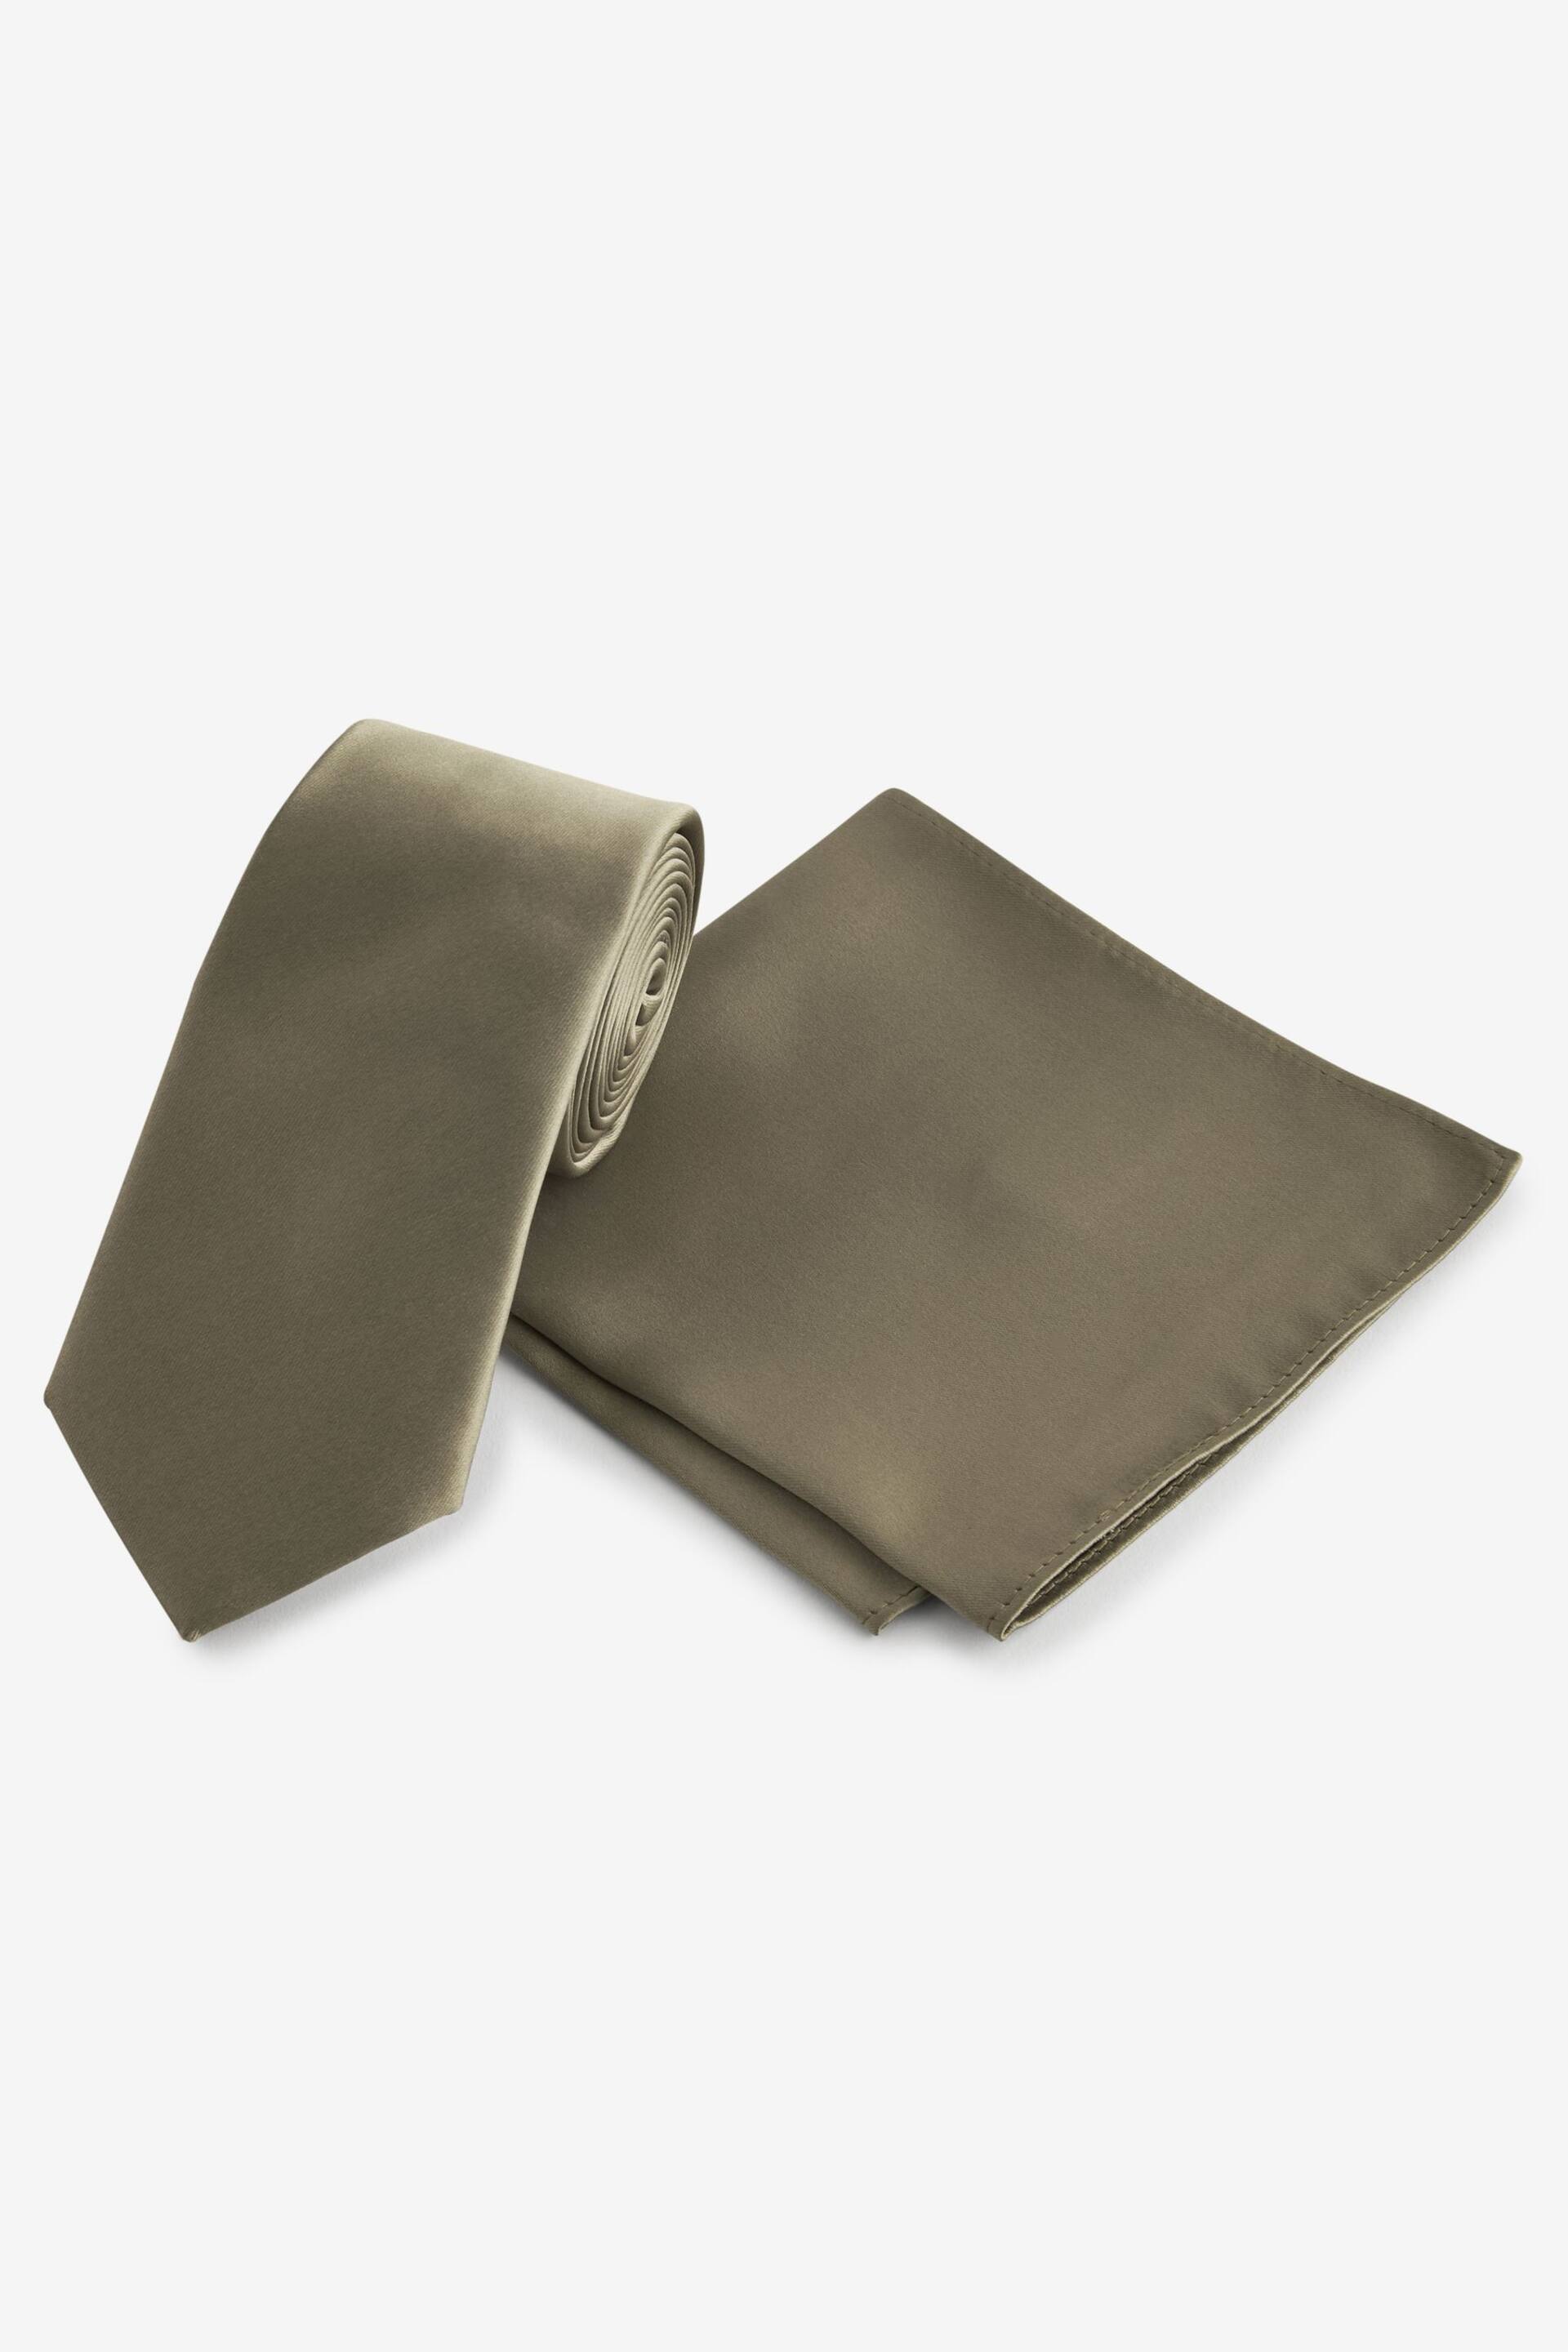 Olive Green Satin Tie And Pocket Square Set - Image 1 of 5